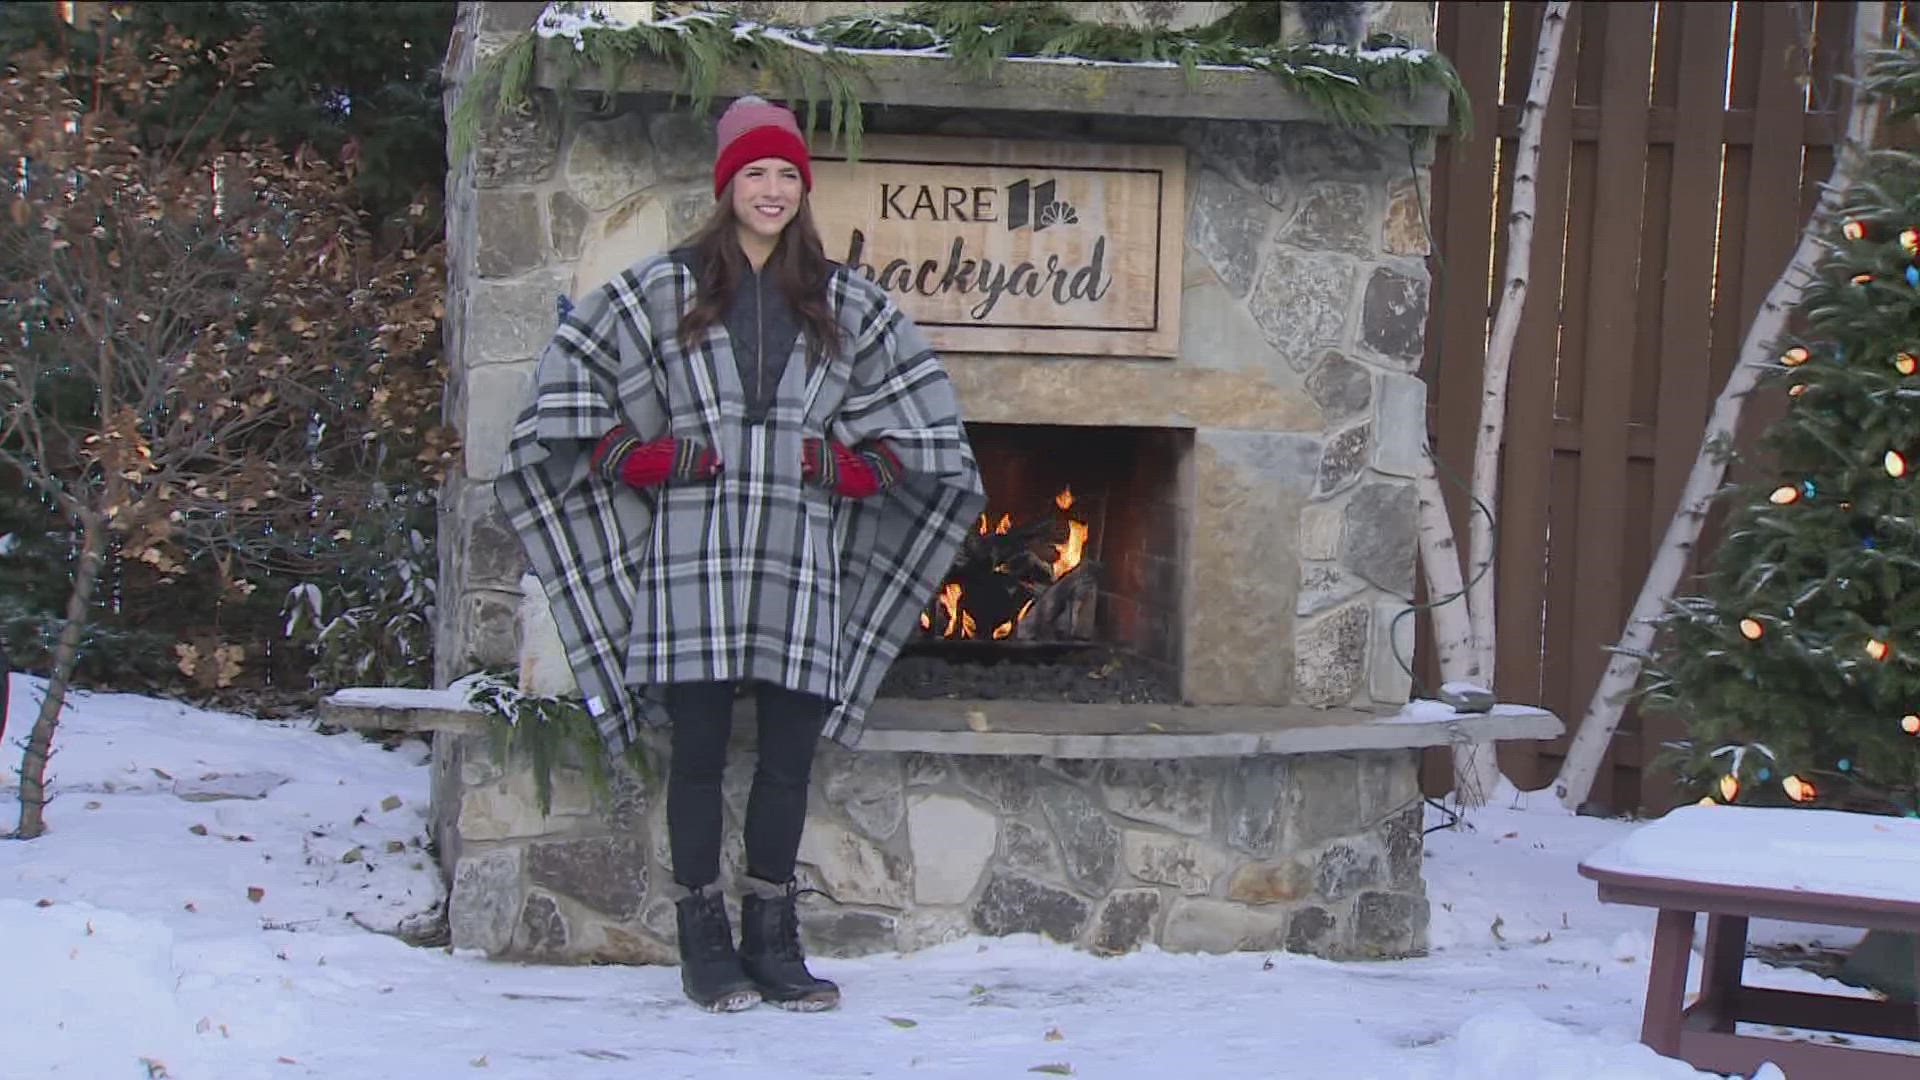 From fashionable accessories to cozy blankets that help give back to the community, Faribault Mill shares their picks for holiday gifts this season.